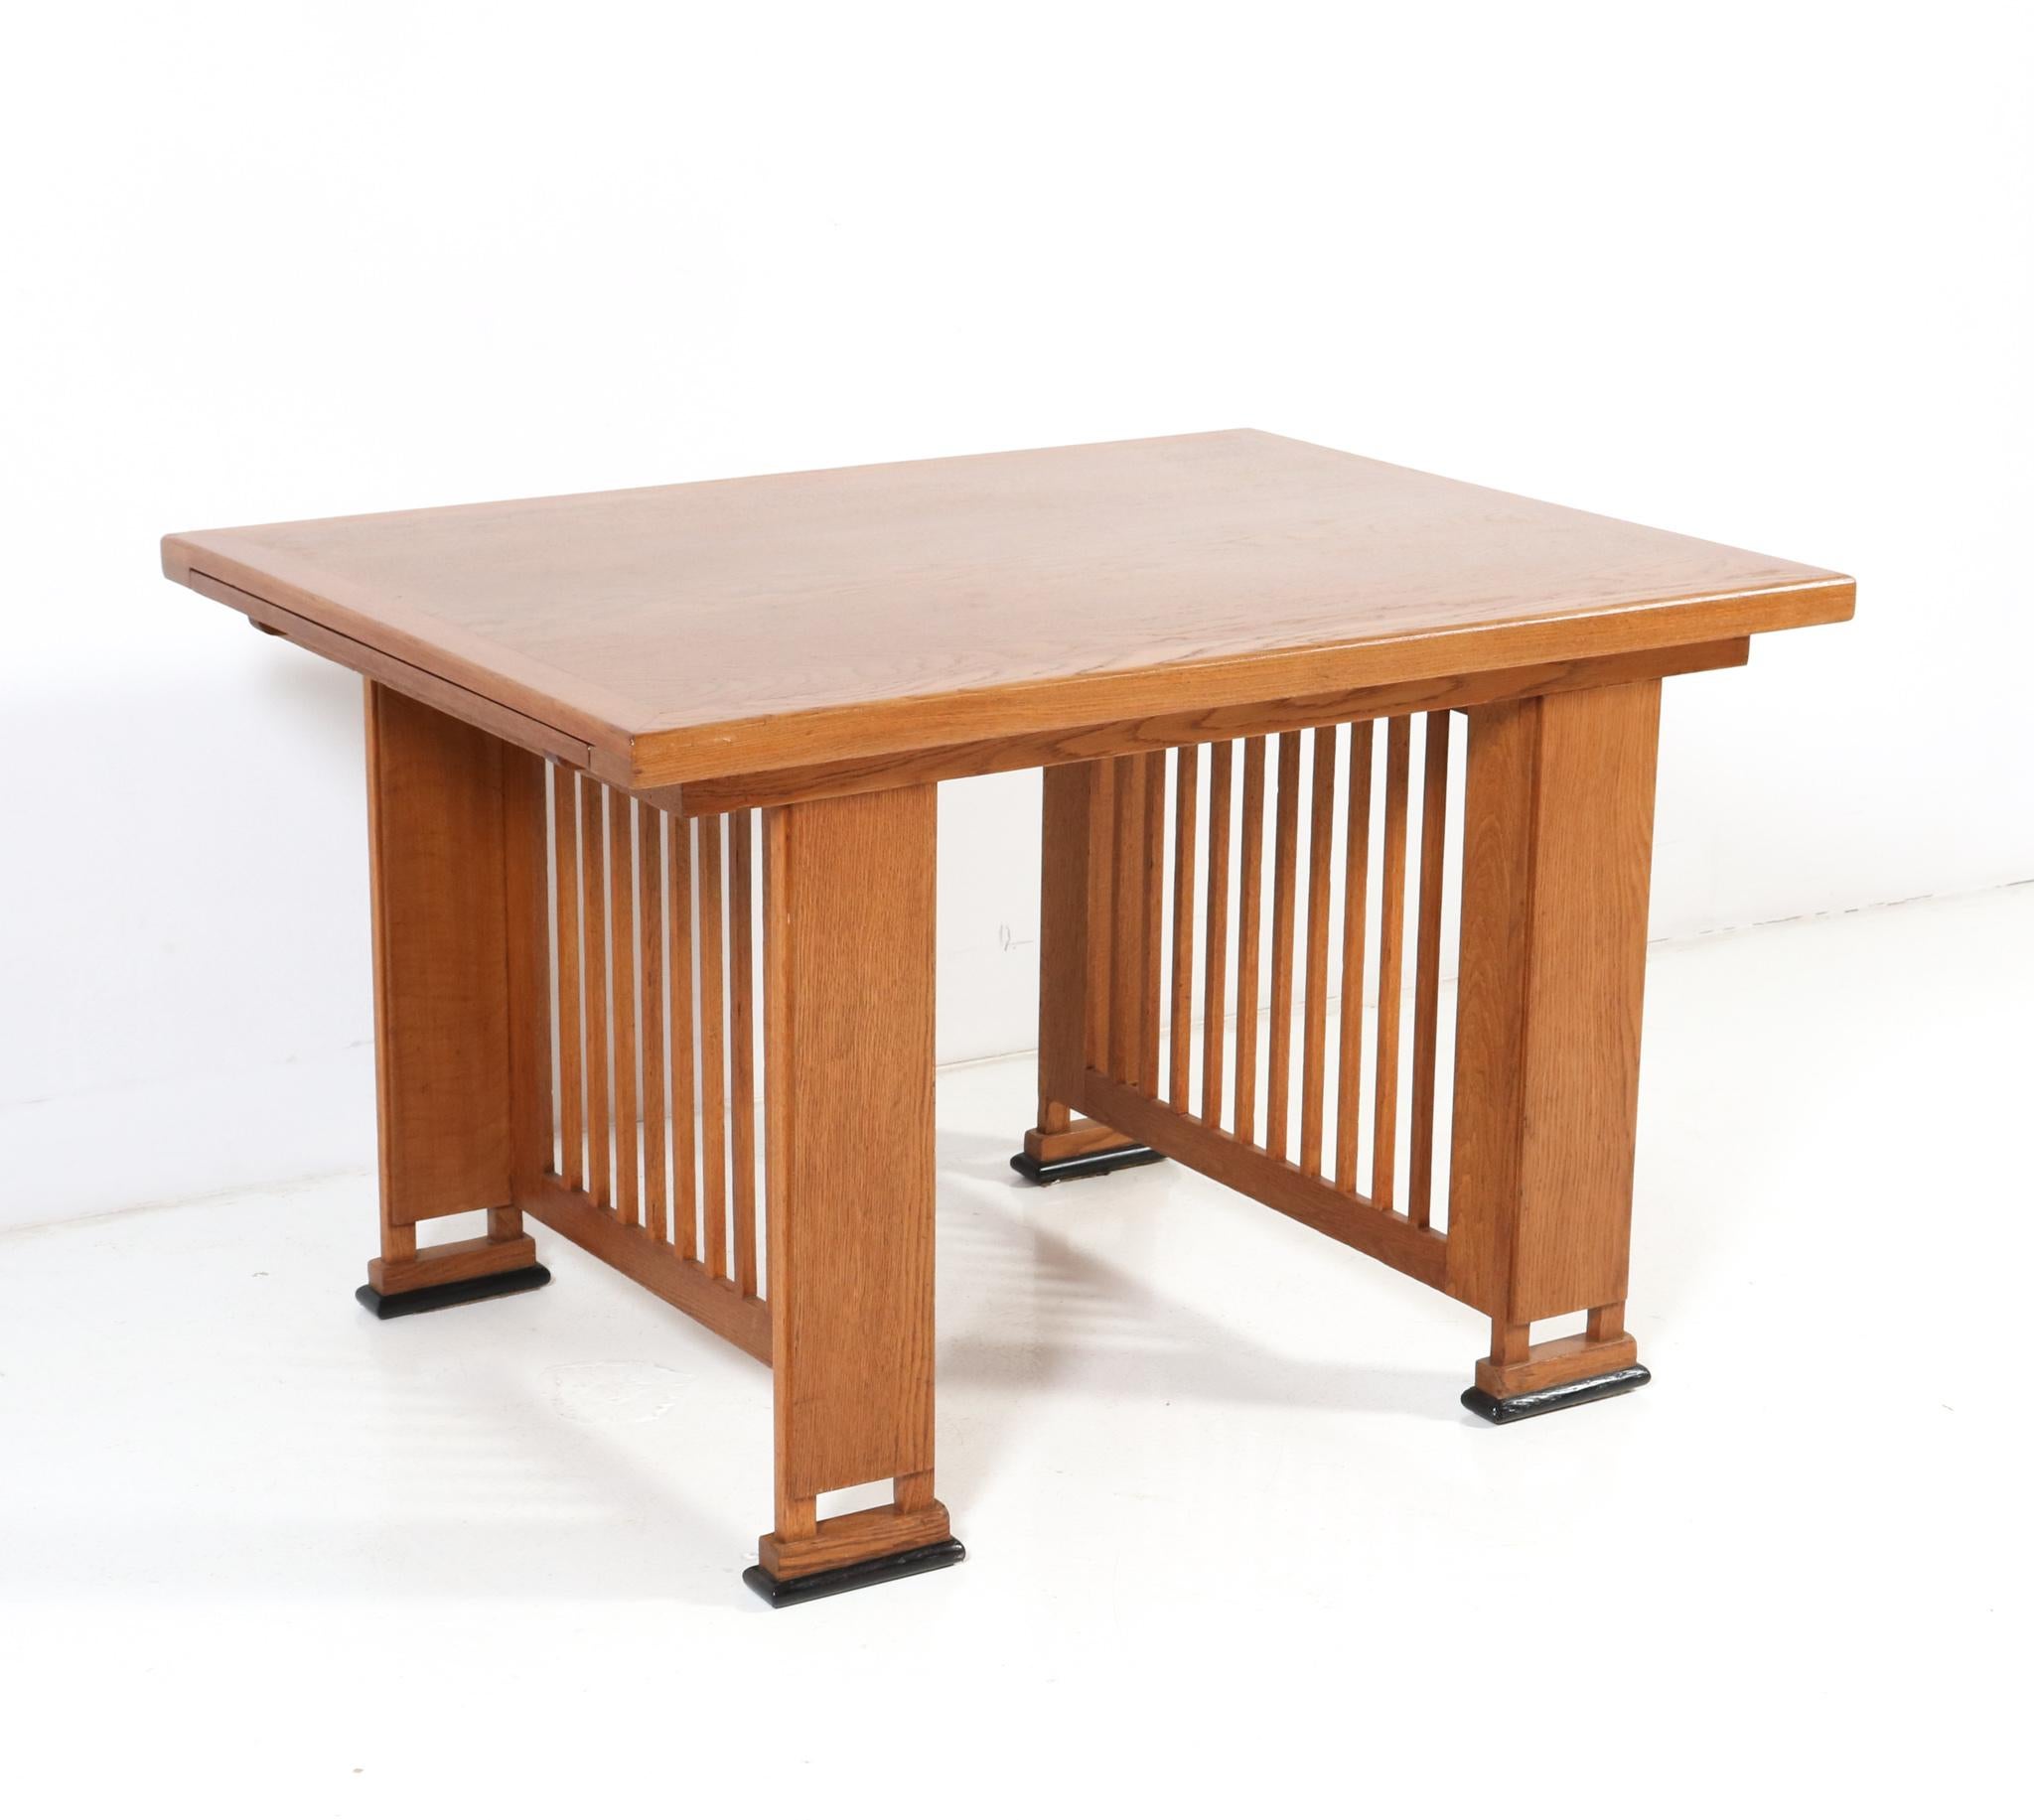 Magnificent and ultra rare Art Deco Modernist writing table or dining room table.
Design by architect Caspers.
Striking Dutch design from the 1920s.
Solid oak base with original oak veneered top.
Two extensions of 40 cm or 15.75 in.
In very